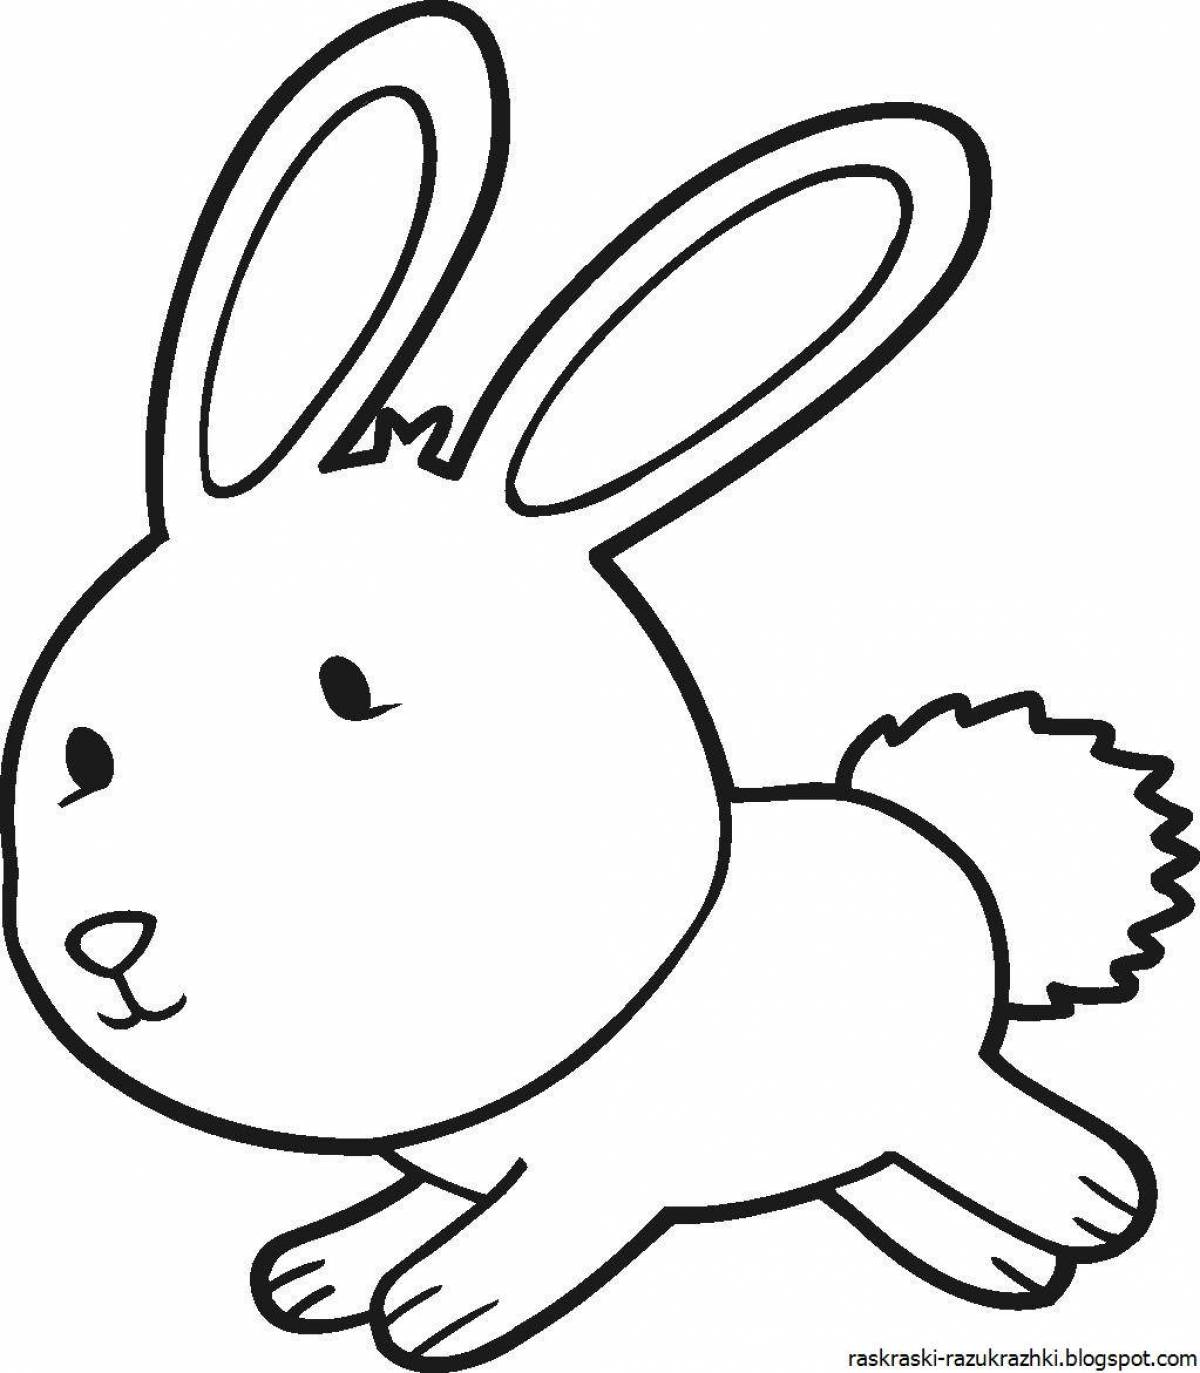 Fascinating hare coloring book for kids